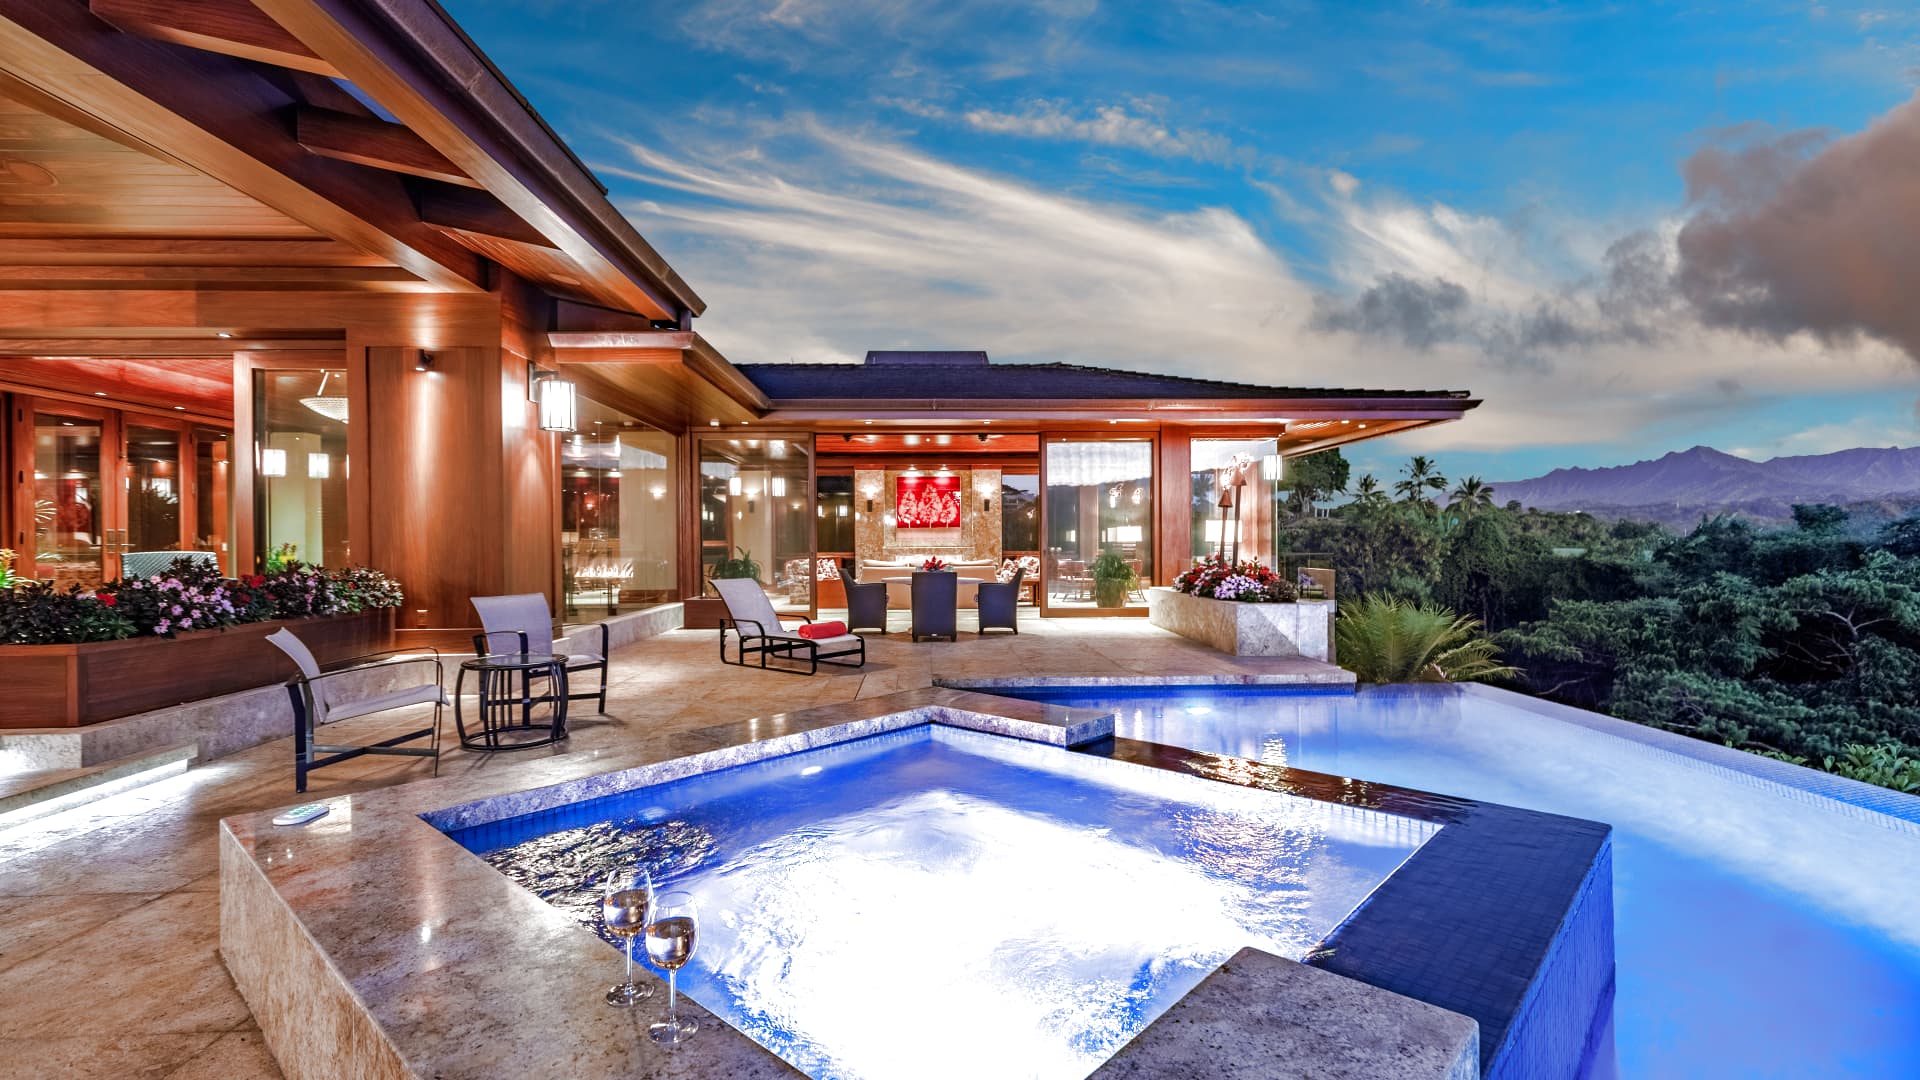 This $23.5 million mansion in Kauai recently sold to guitarist Carlos Santana.